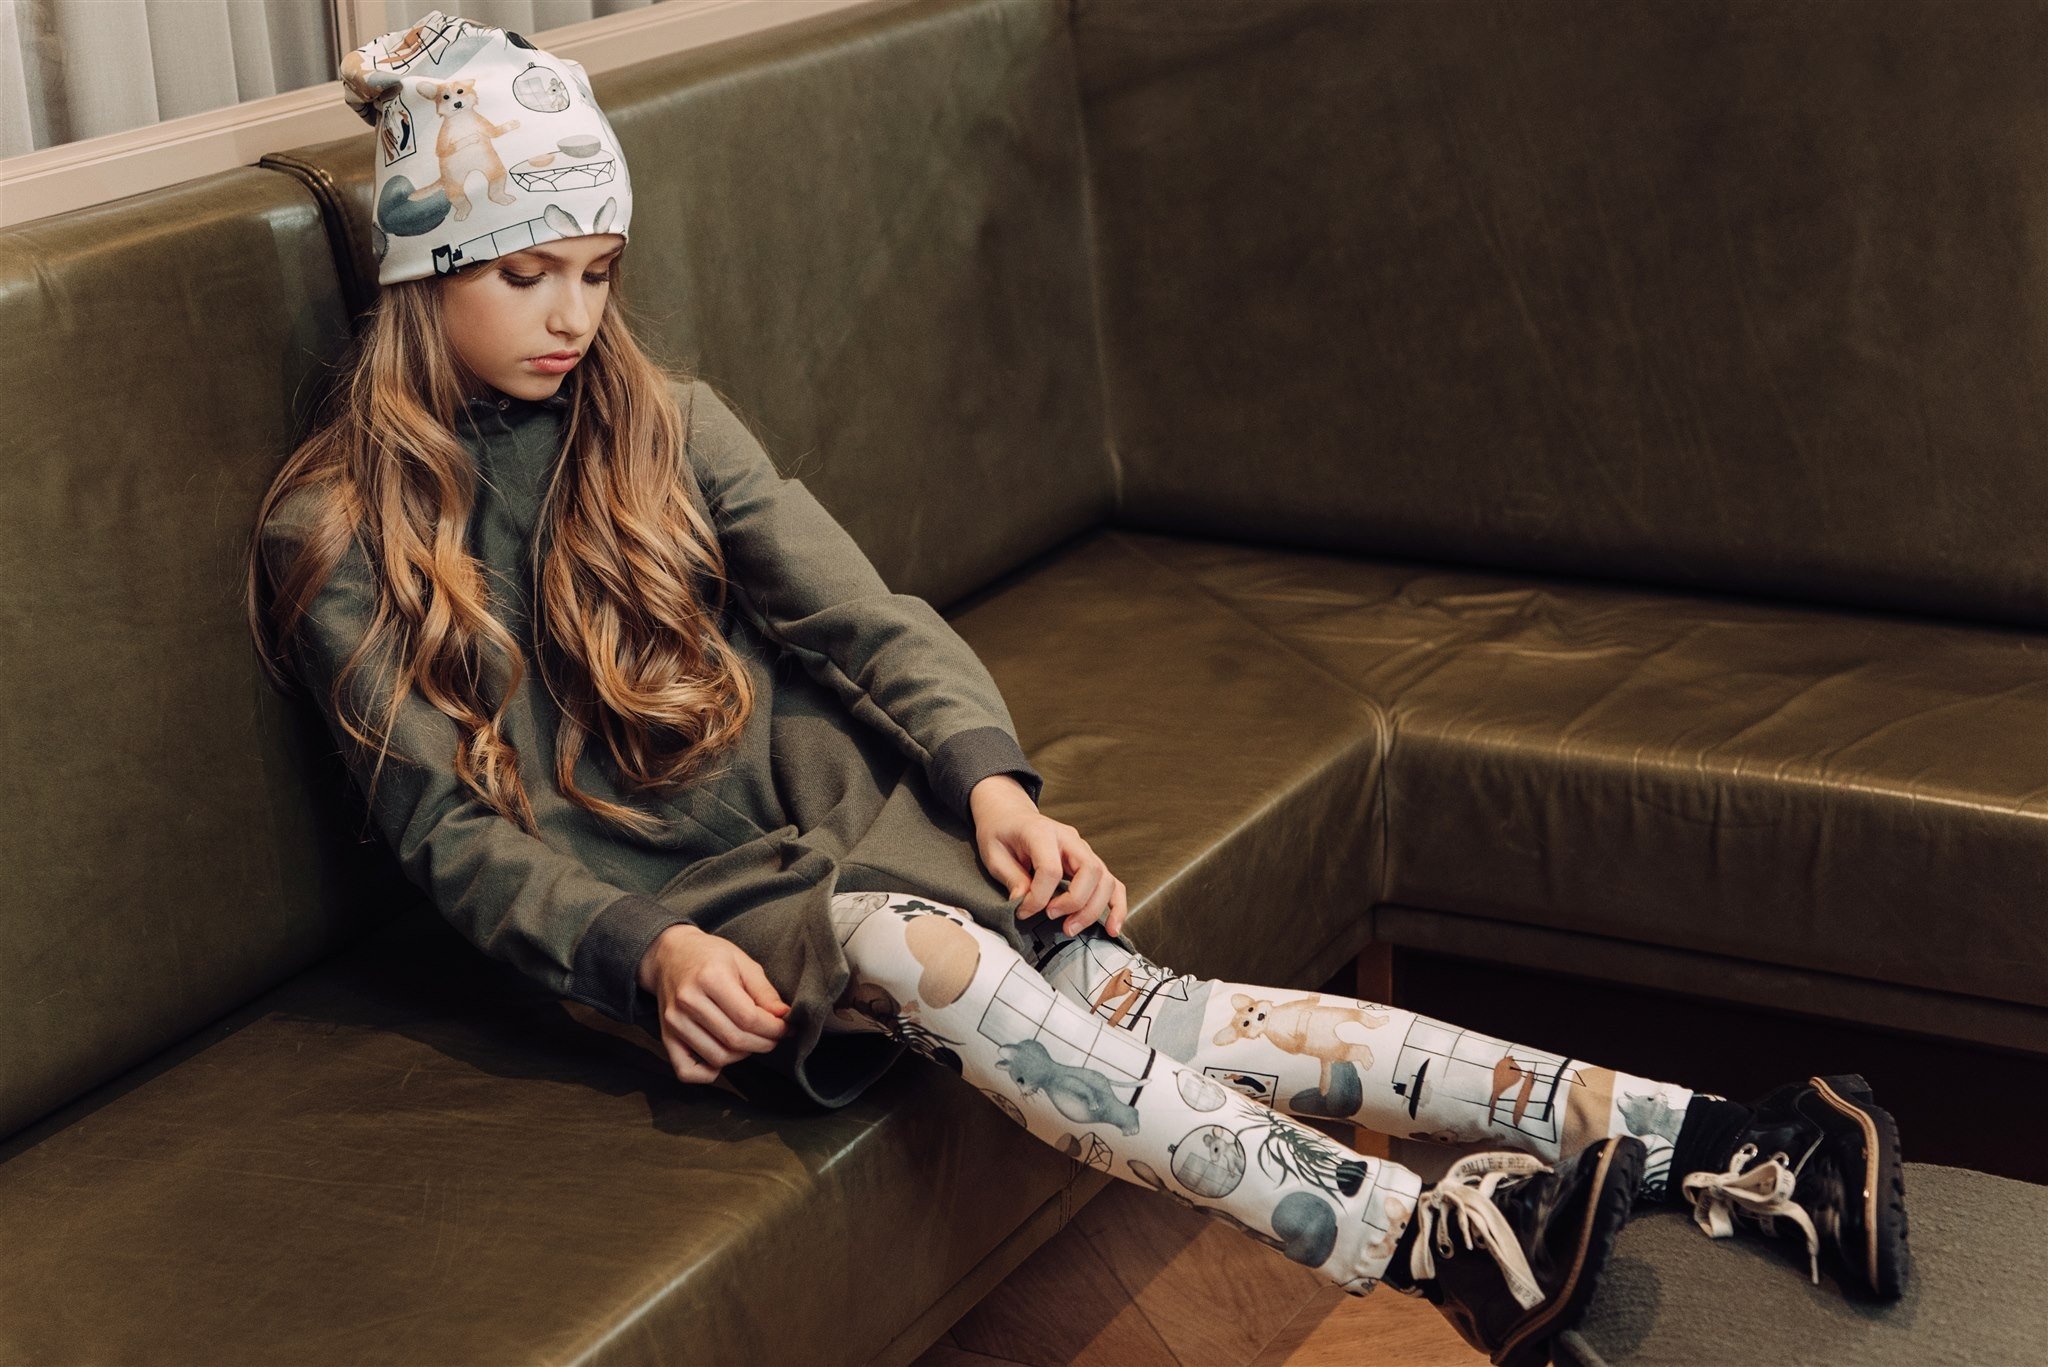 Kids clothing brand HEBE presents collection ‘Sweet home’ to enjoy coziness